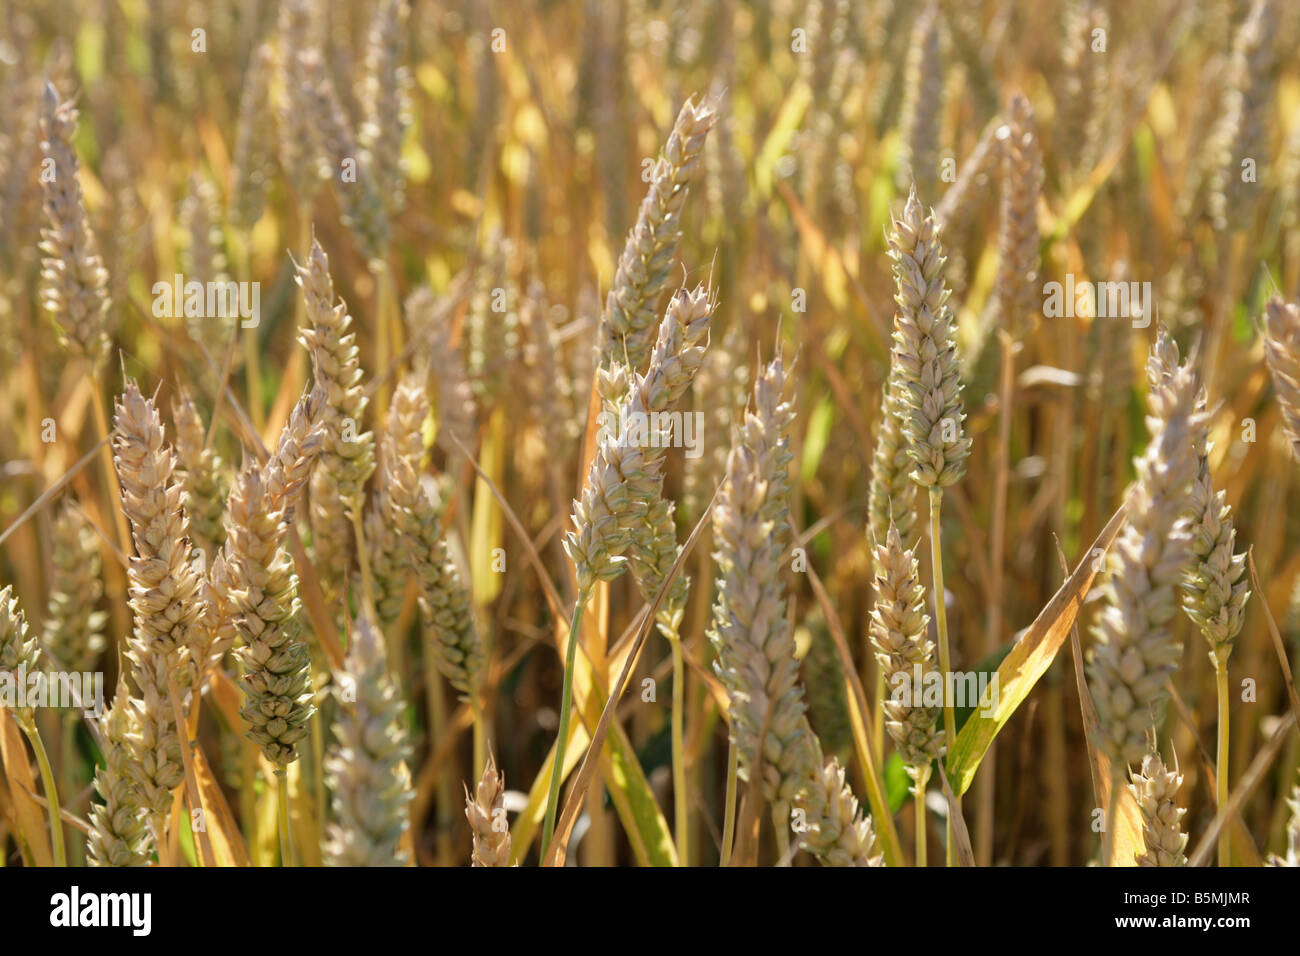 Golden corn or wheat growing in a field on a farm. Stock Photo